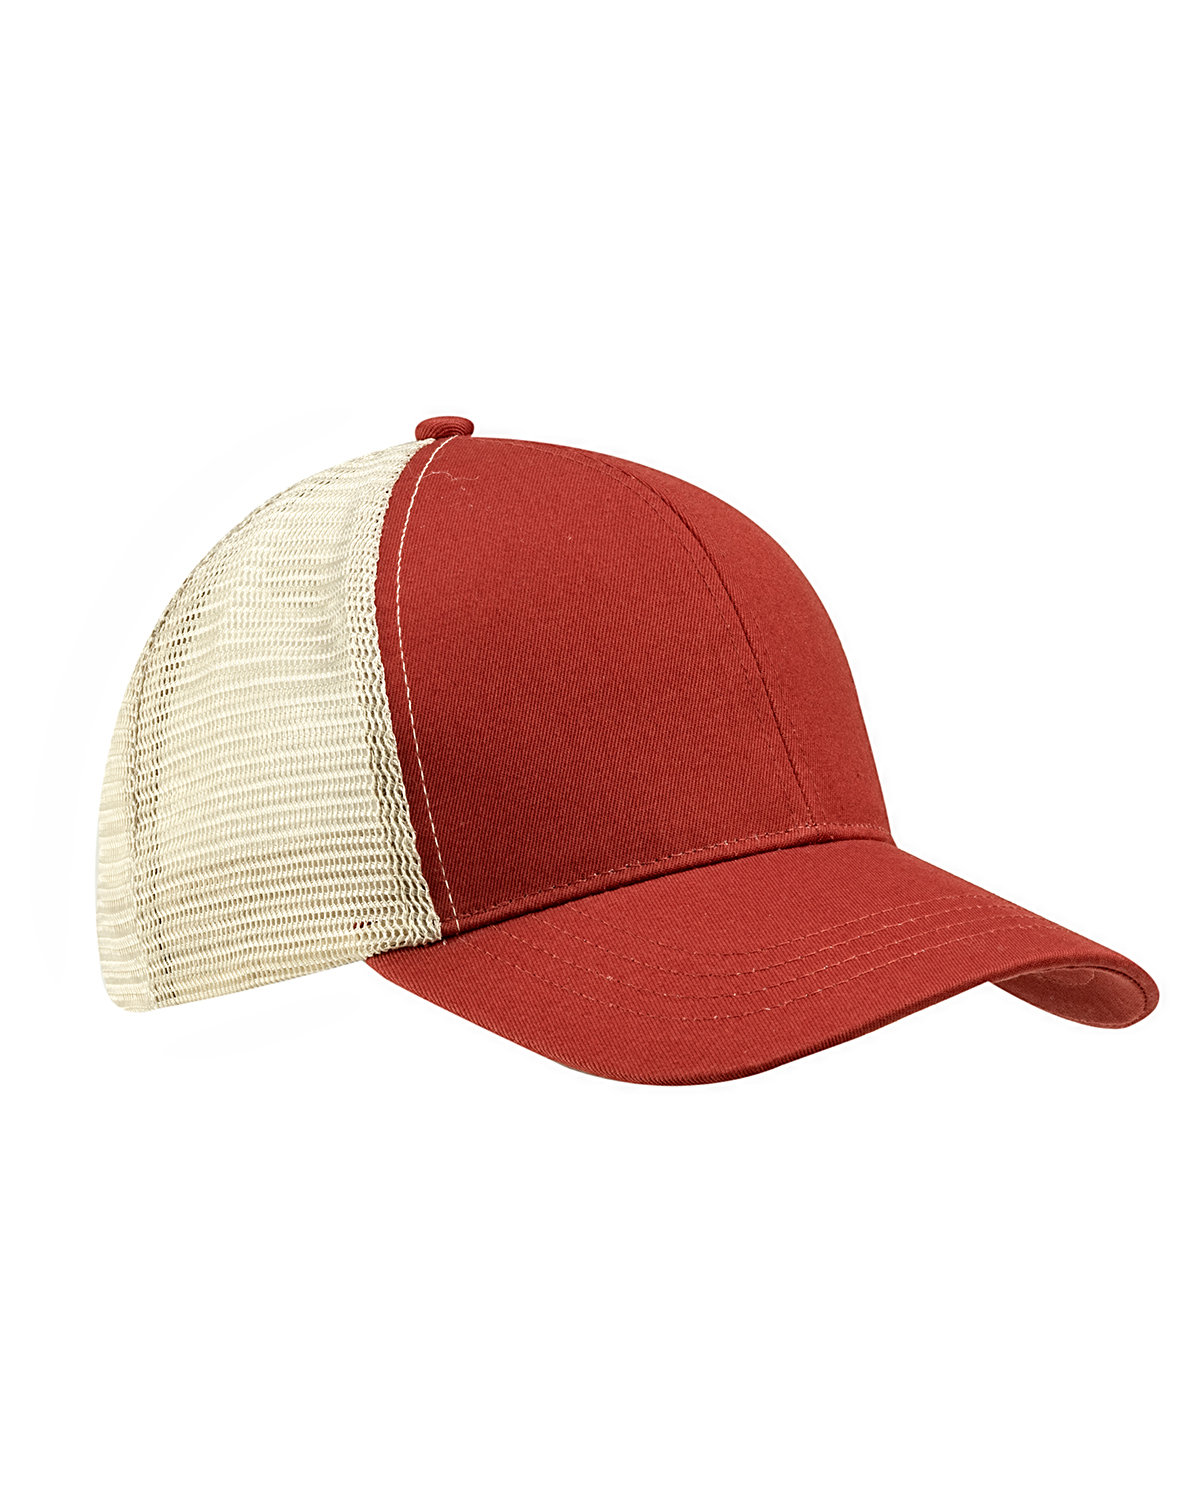 econscious Eco Trucker Hat picante/ oyster 